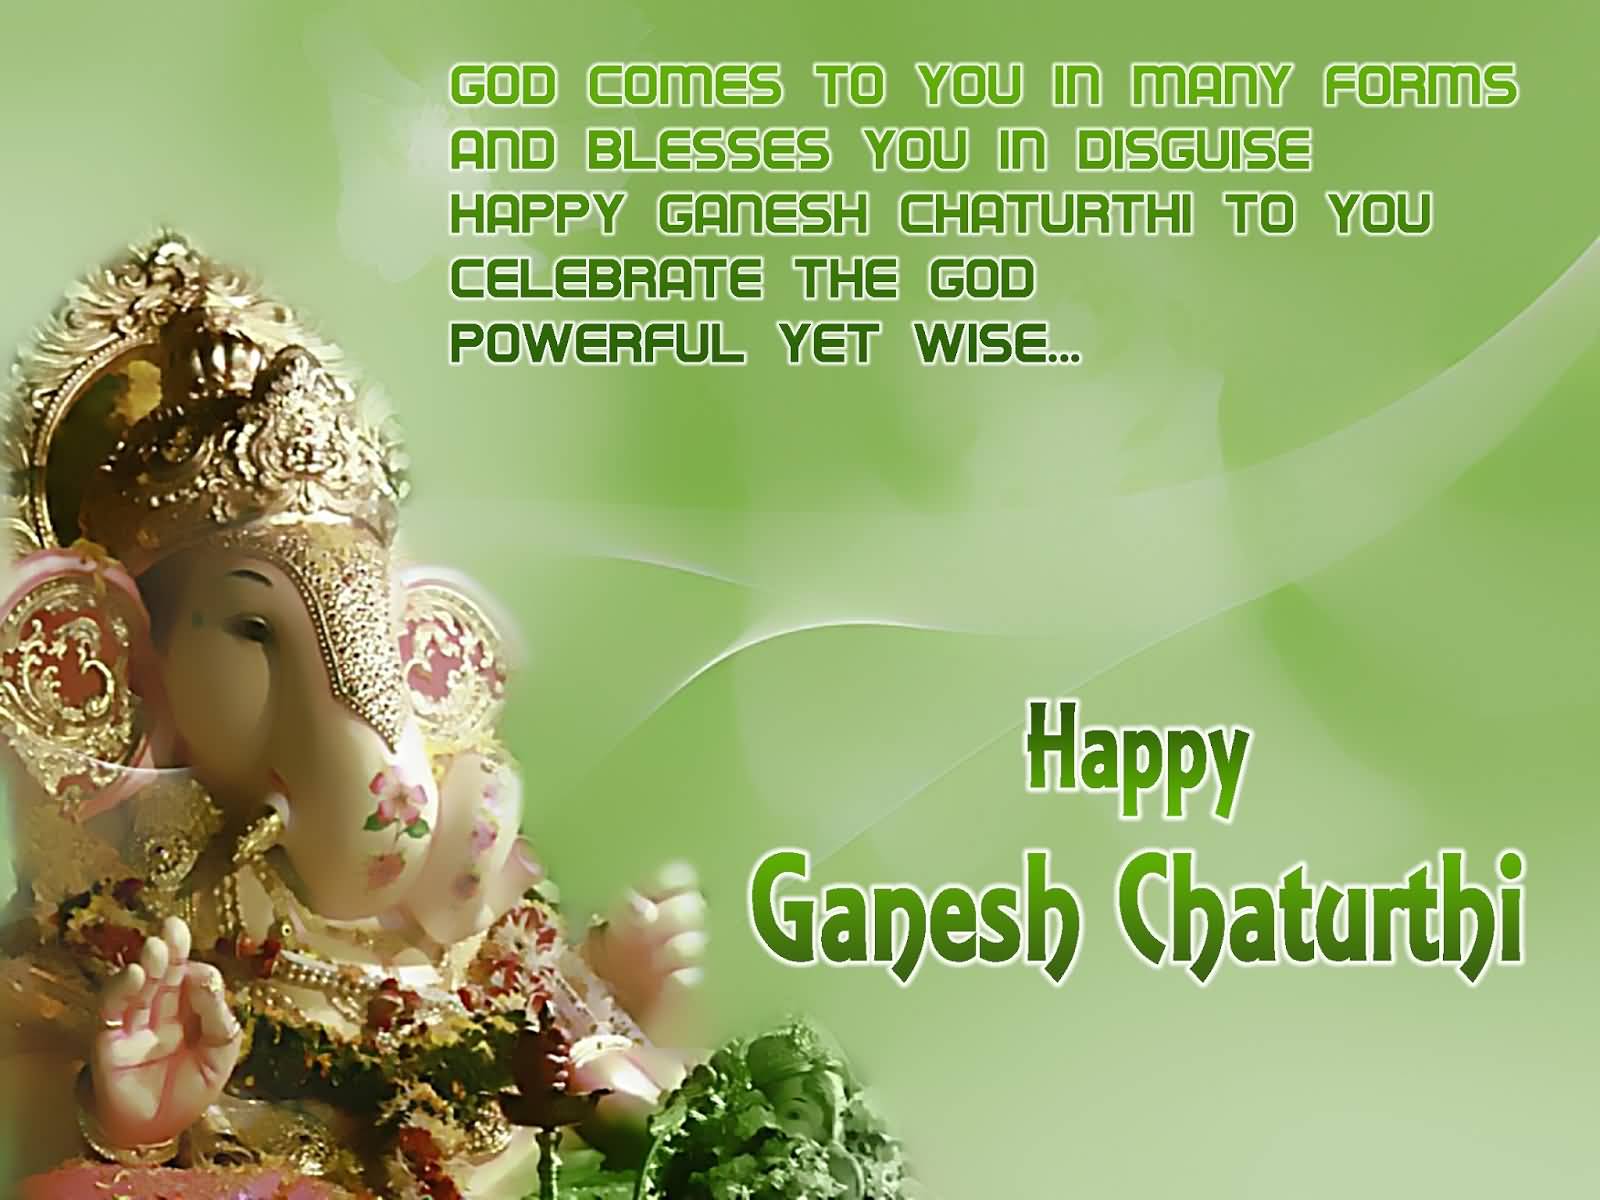 God Comes To You In Many Forms And Blesses You In Disguise Happy Ganesh Chaturthi To You Celebrate The God Powerful Yet Wise Happy Ganesh Chaturthi